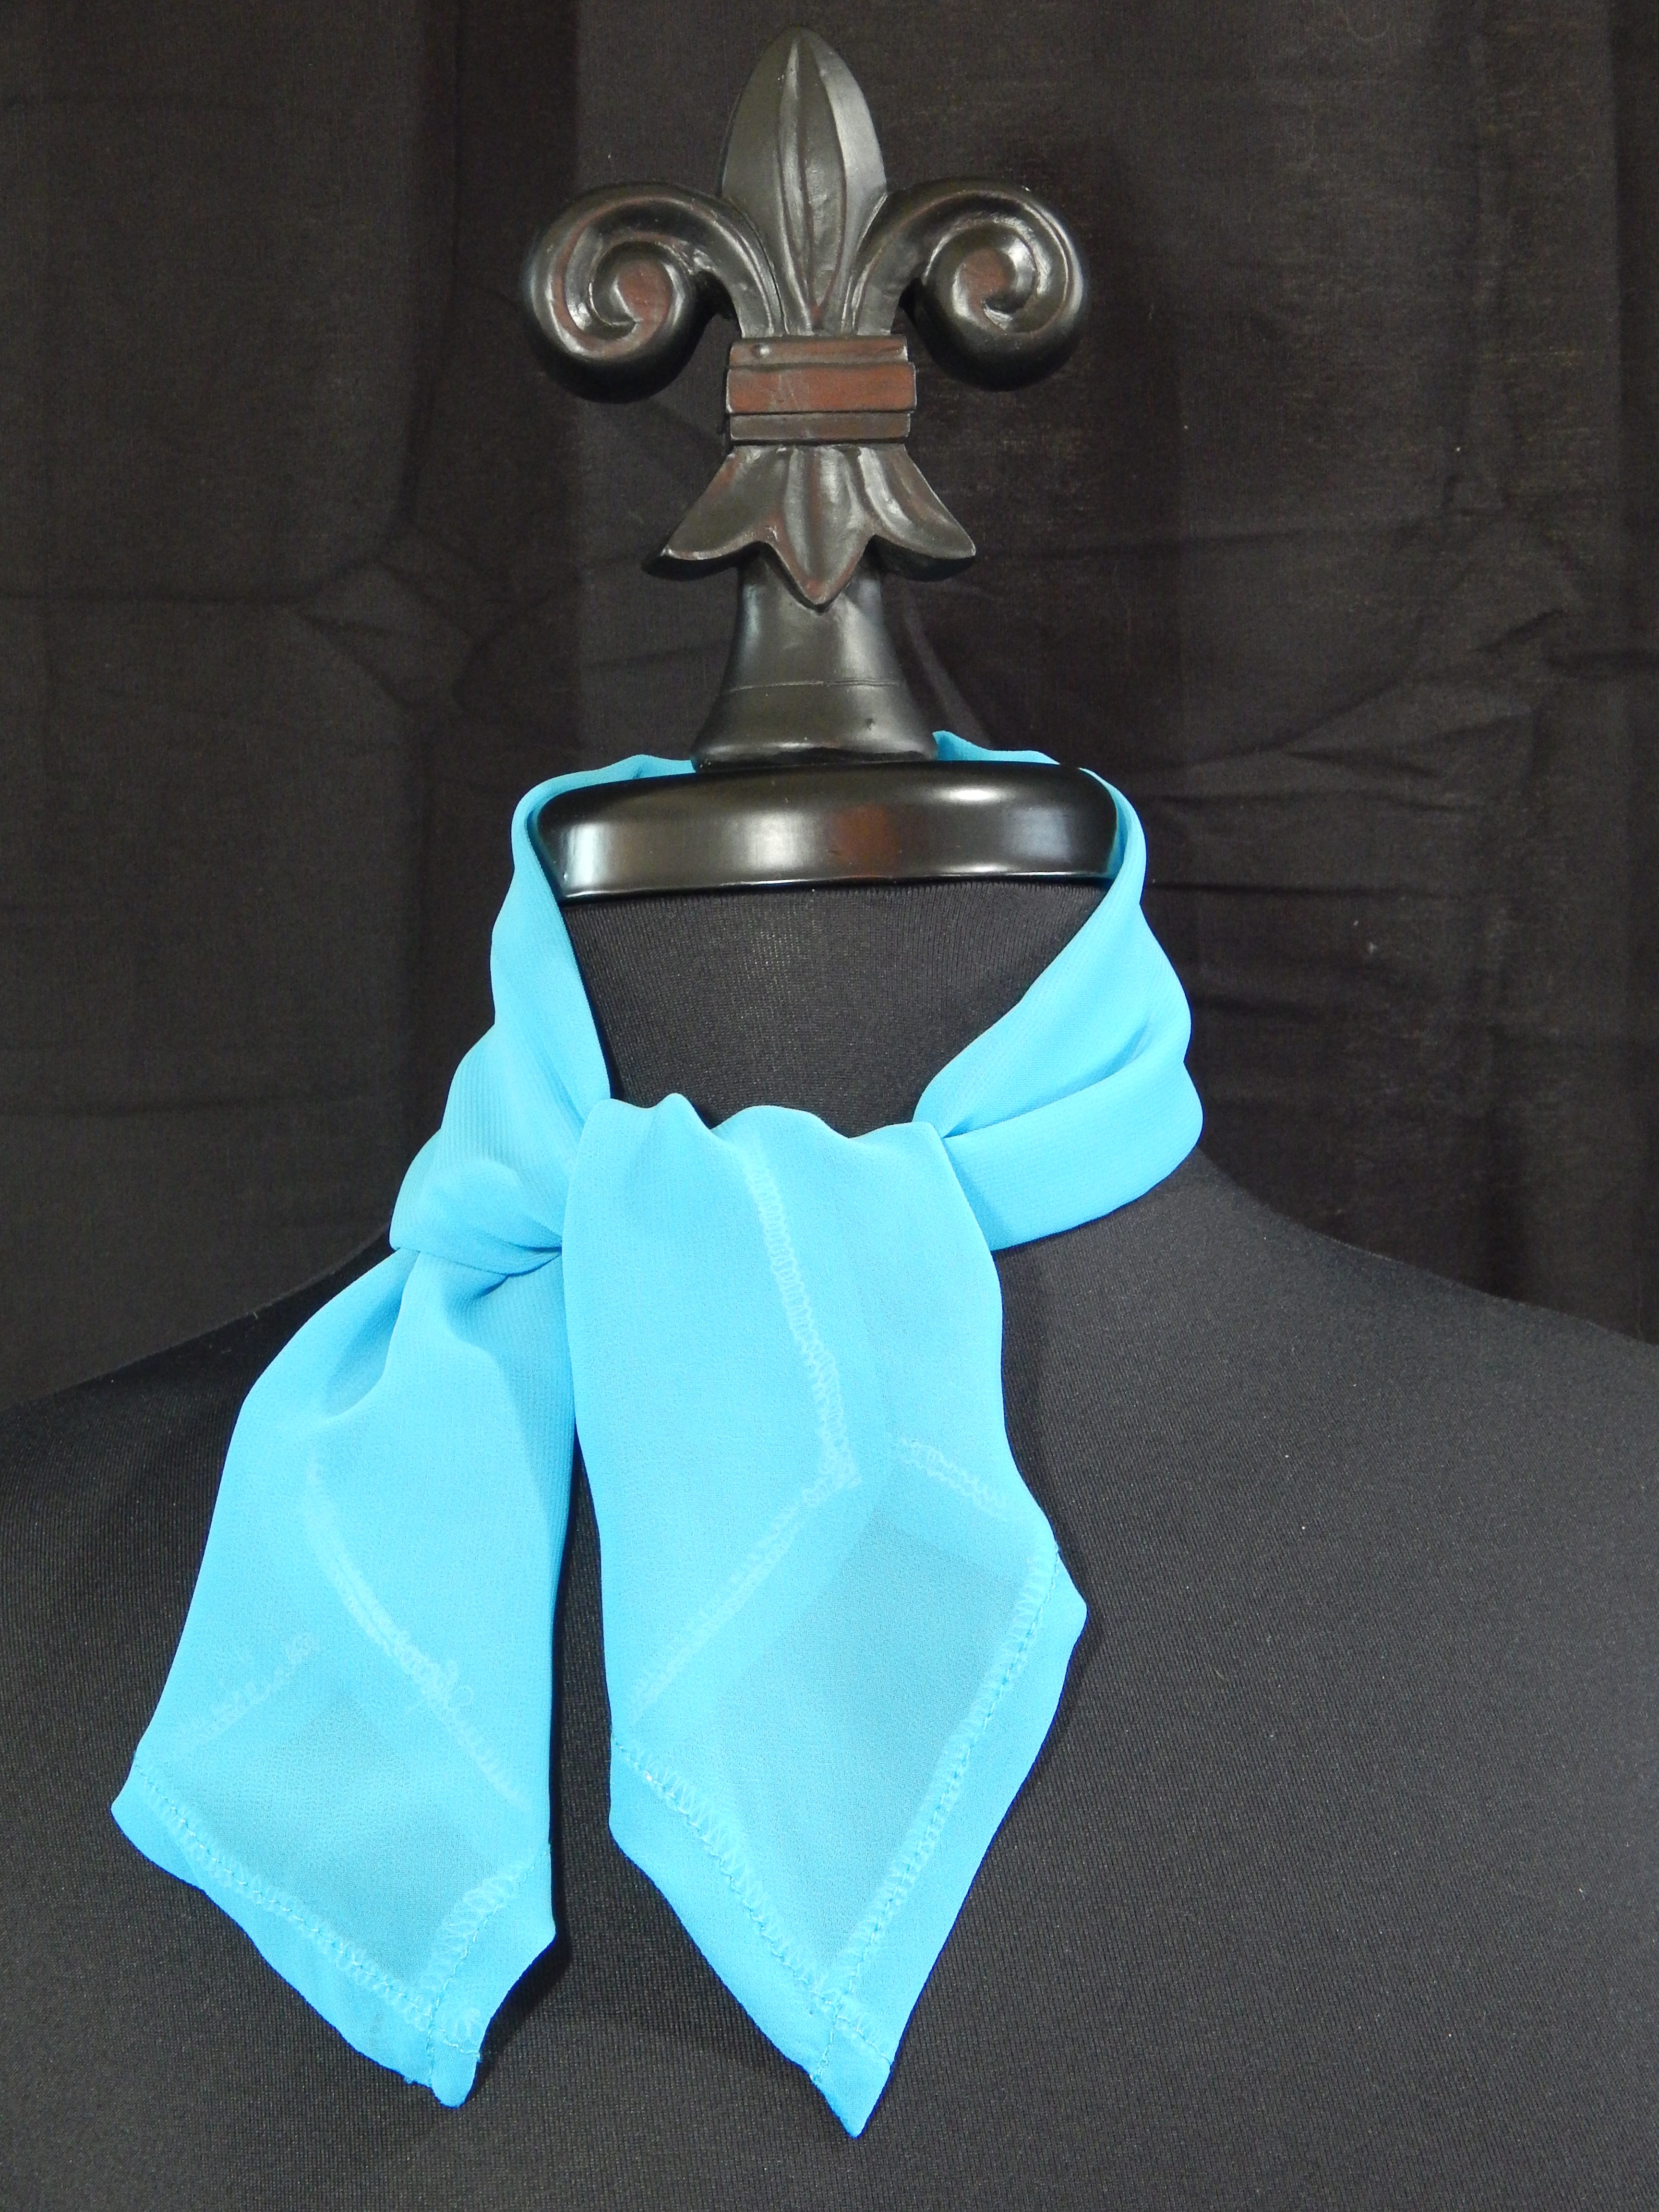 Solid Horse Show Scarf - Sheer Turquoise